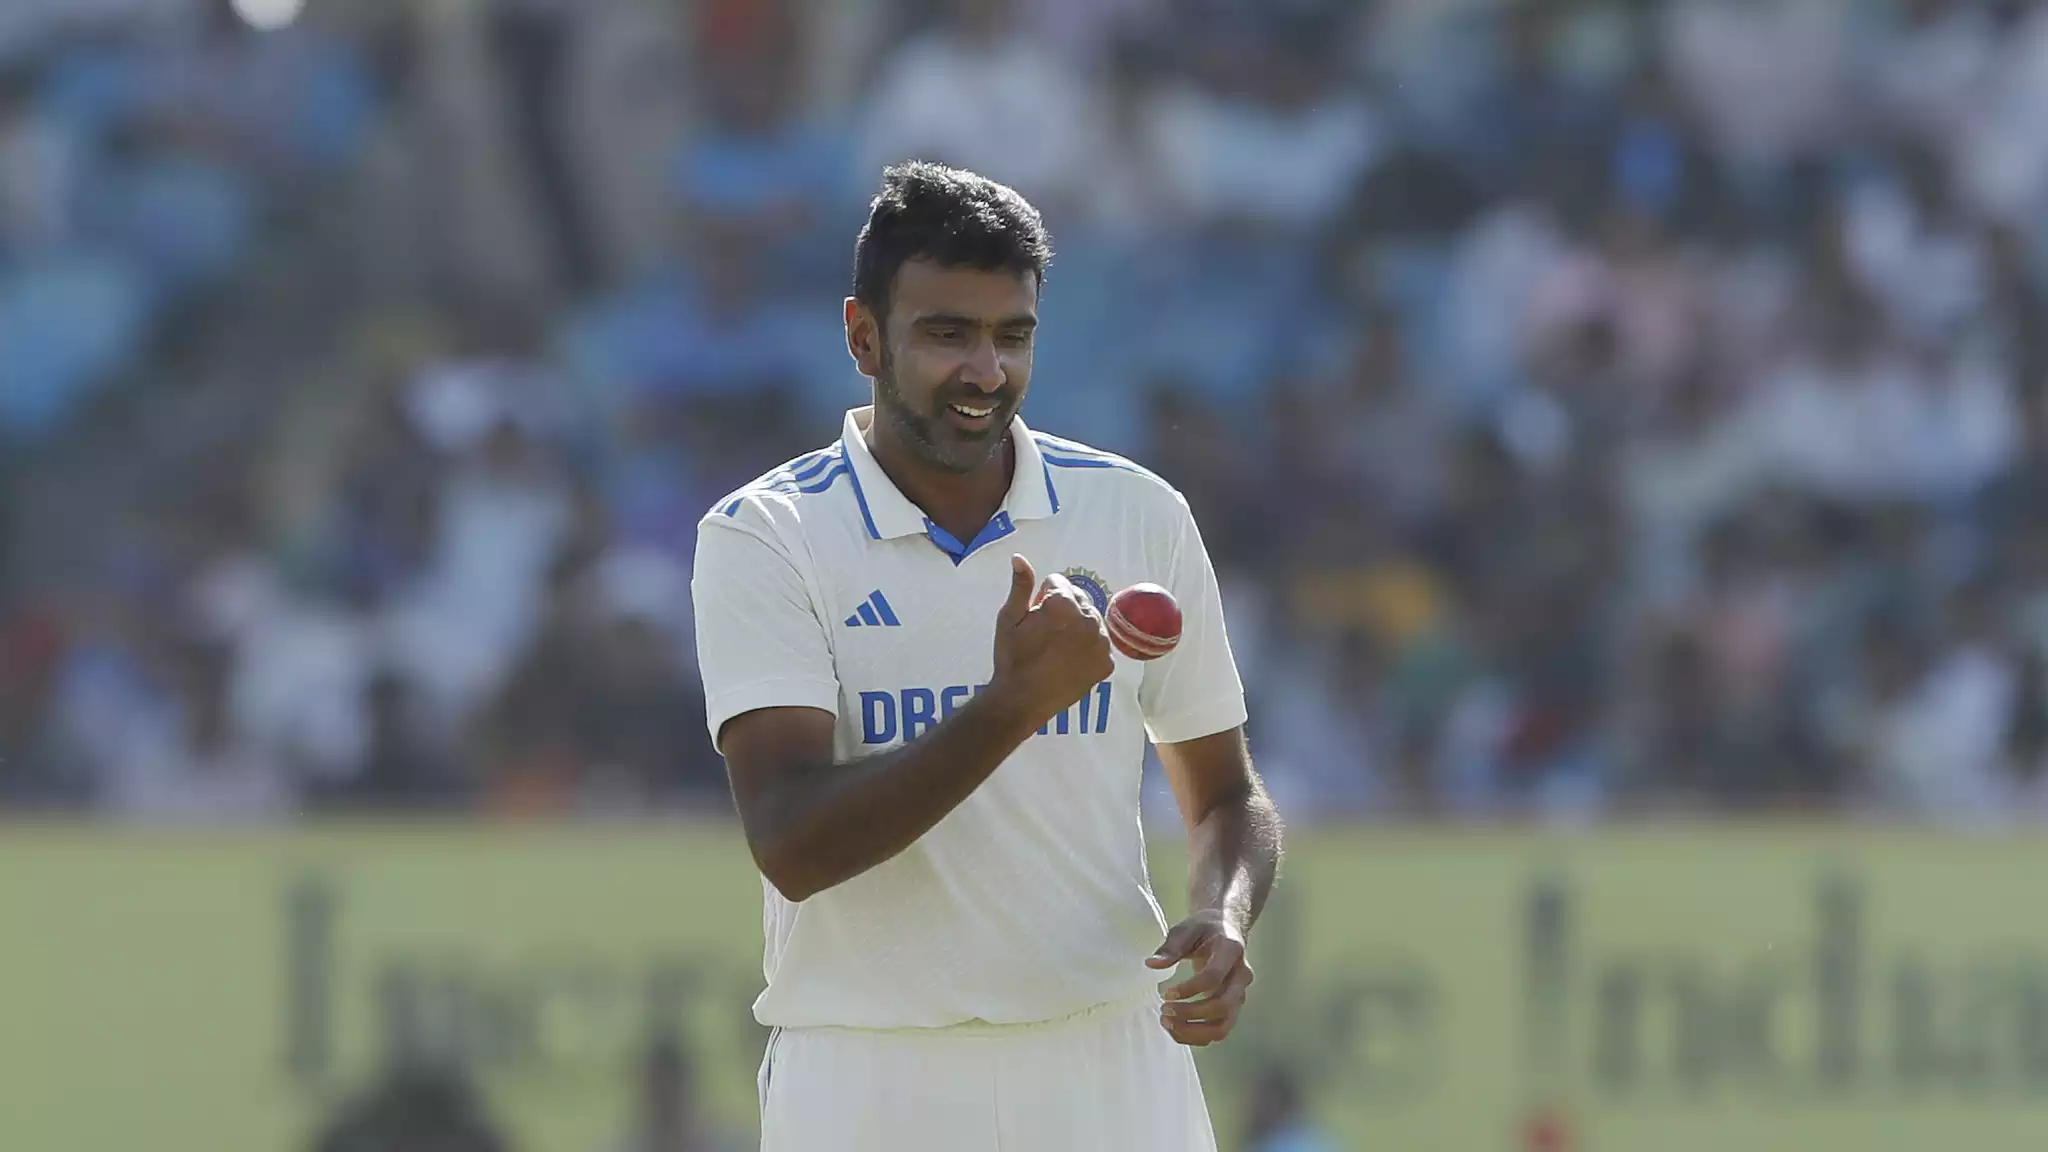 Ashwin's Historic Feat: A Milestone in Test Cricket's Storied Annals